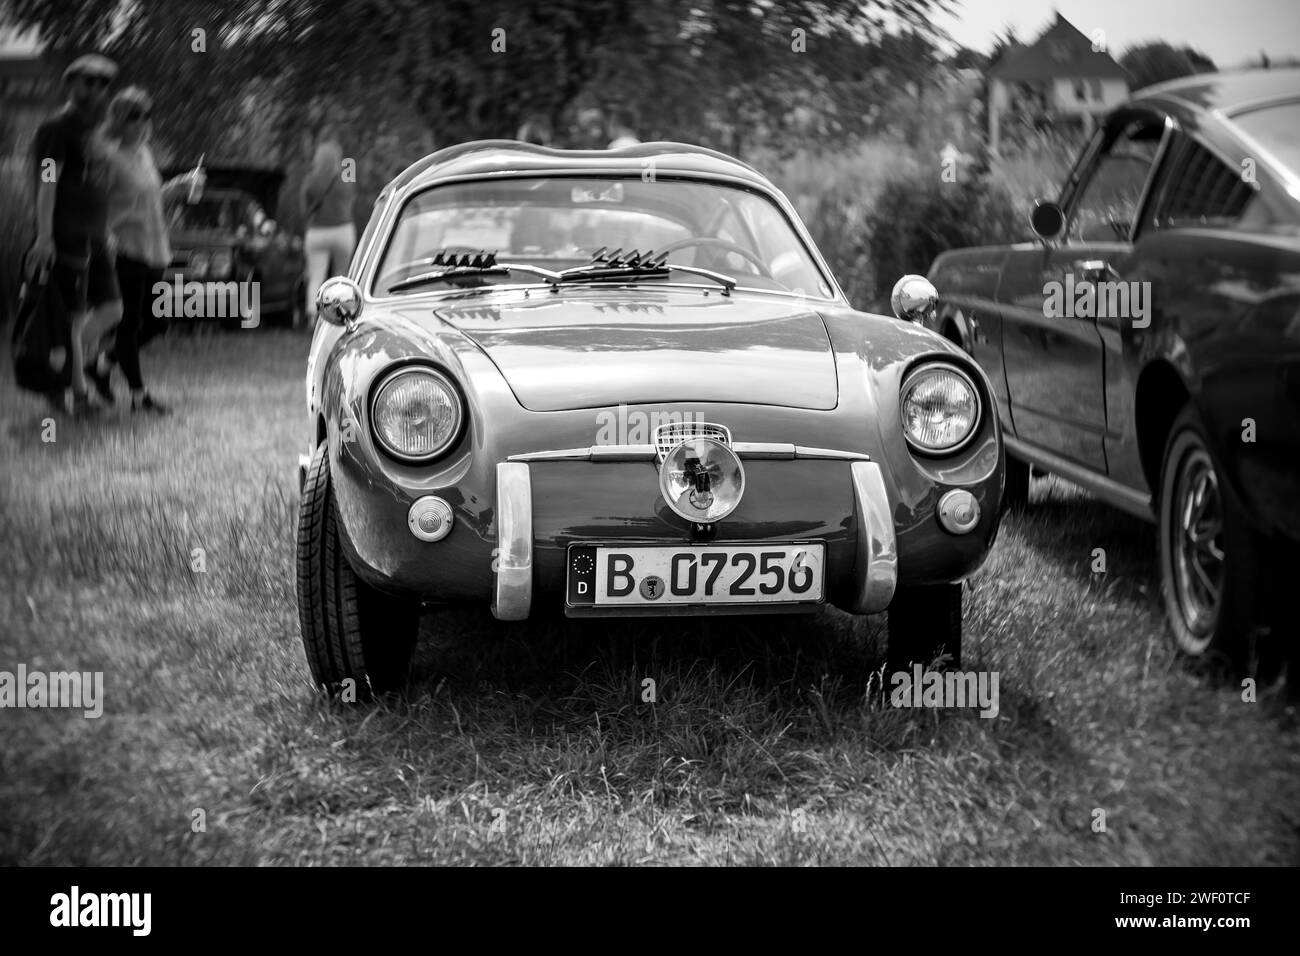 WERDER (HAVEL), GERMANY - MAY 20, 2023: The sport car Fiat-Abarth 750 Zagato 'Double Bubble'. Swirl bokeh, art lens. Festival Werder Classics 2023 Stock Photo